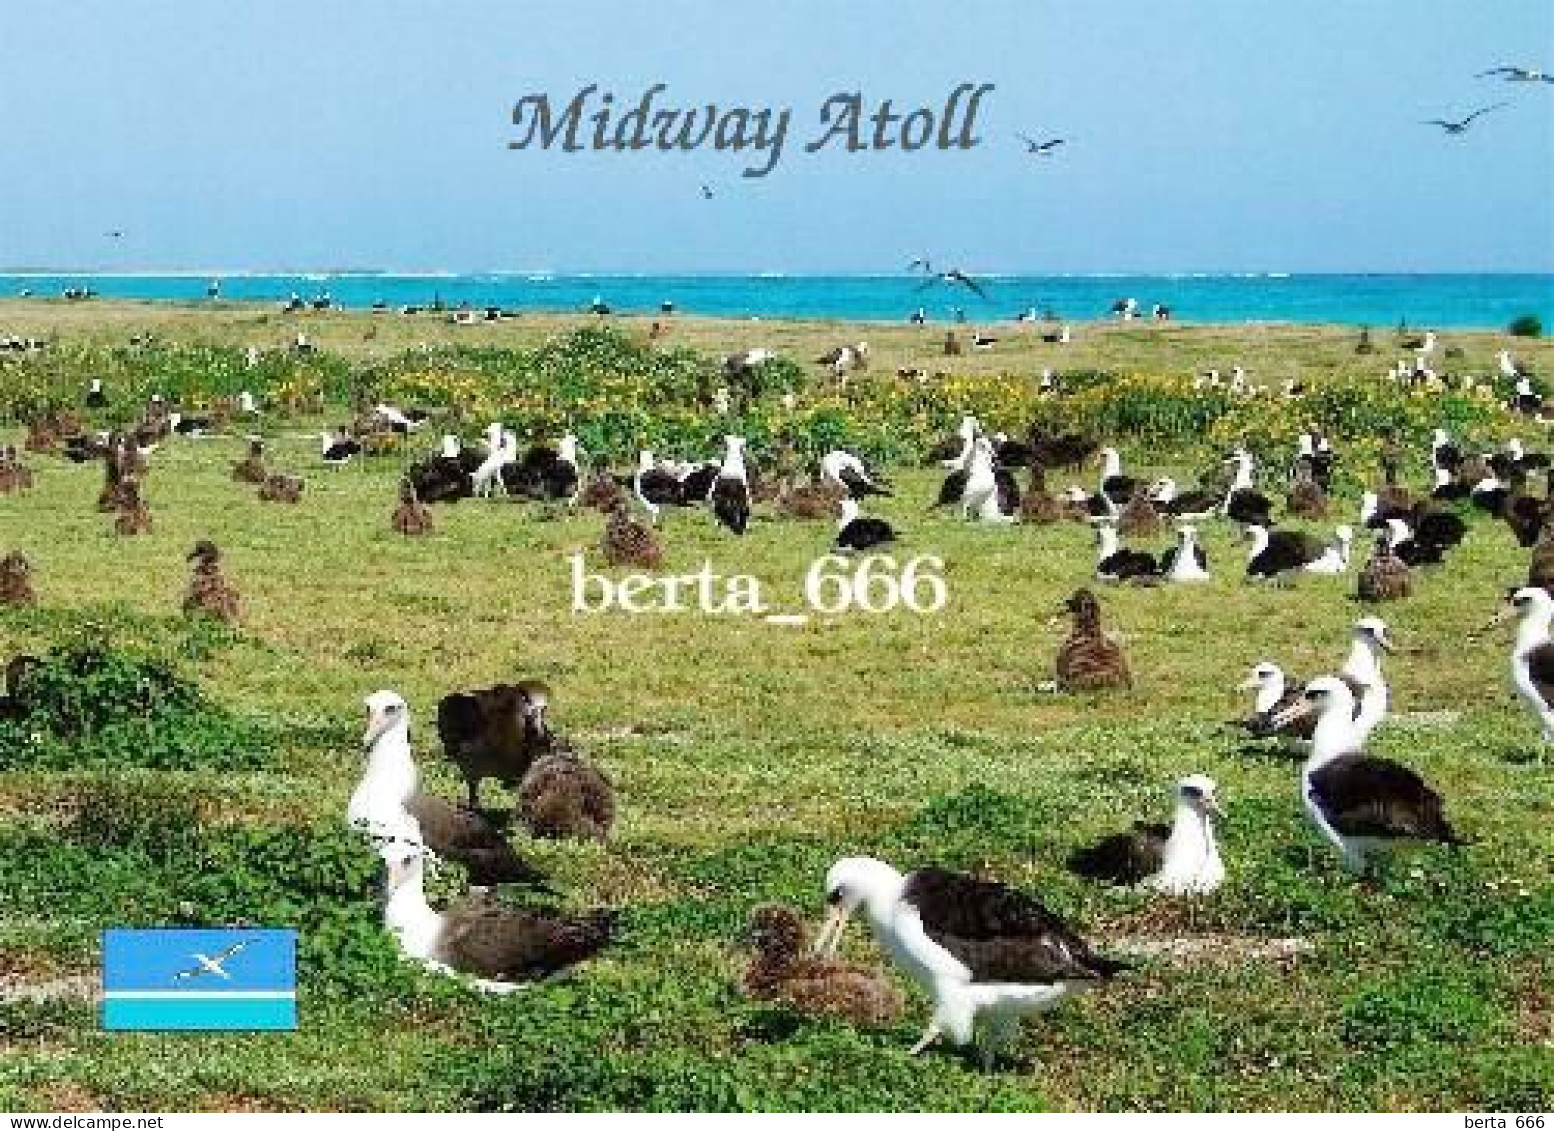 United States Midway Atoll Albatrosses New Postcard - Islas Midway